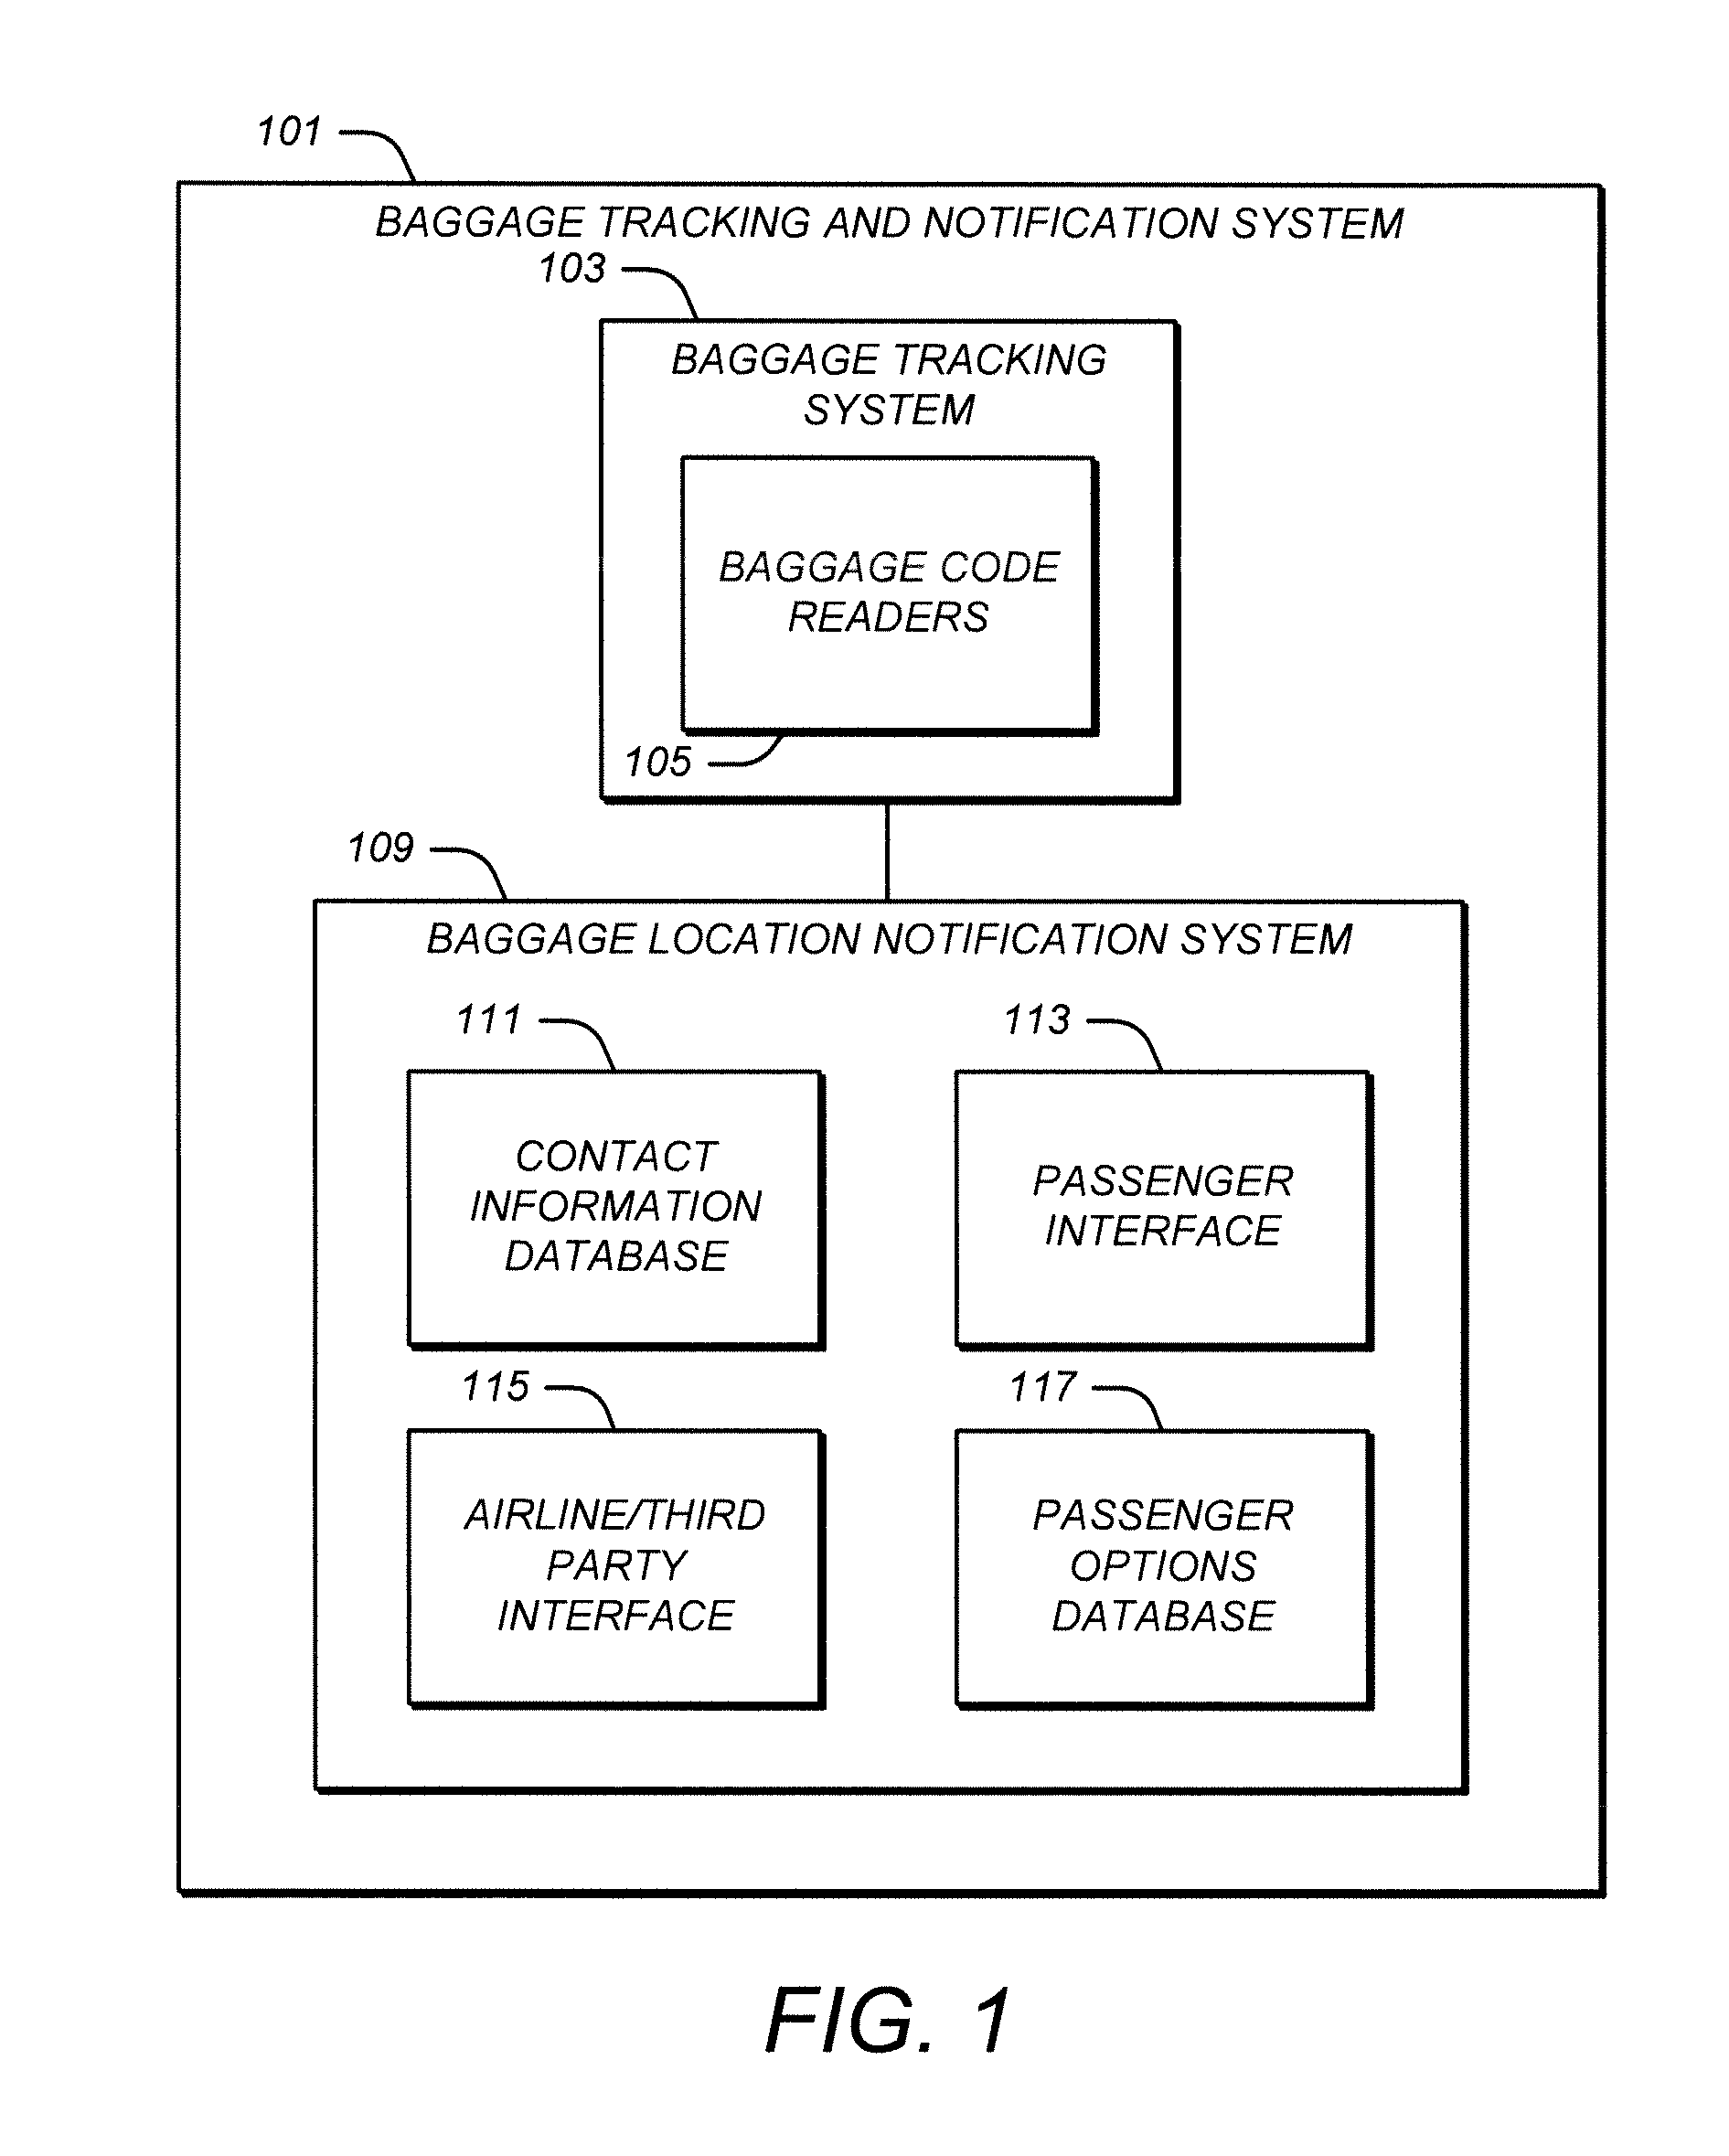 Airline baggage tracking and notification system